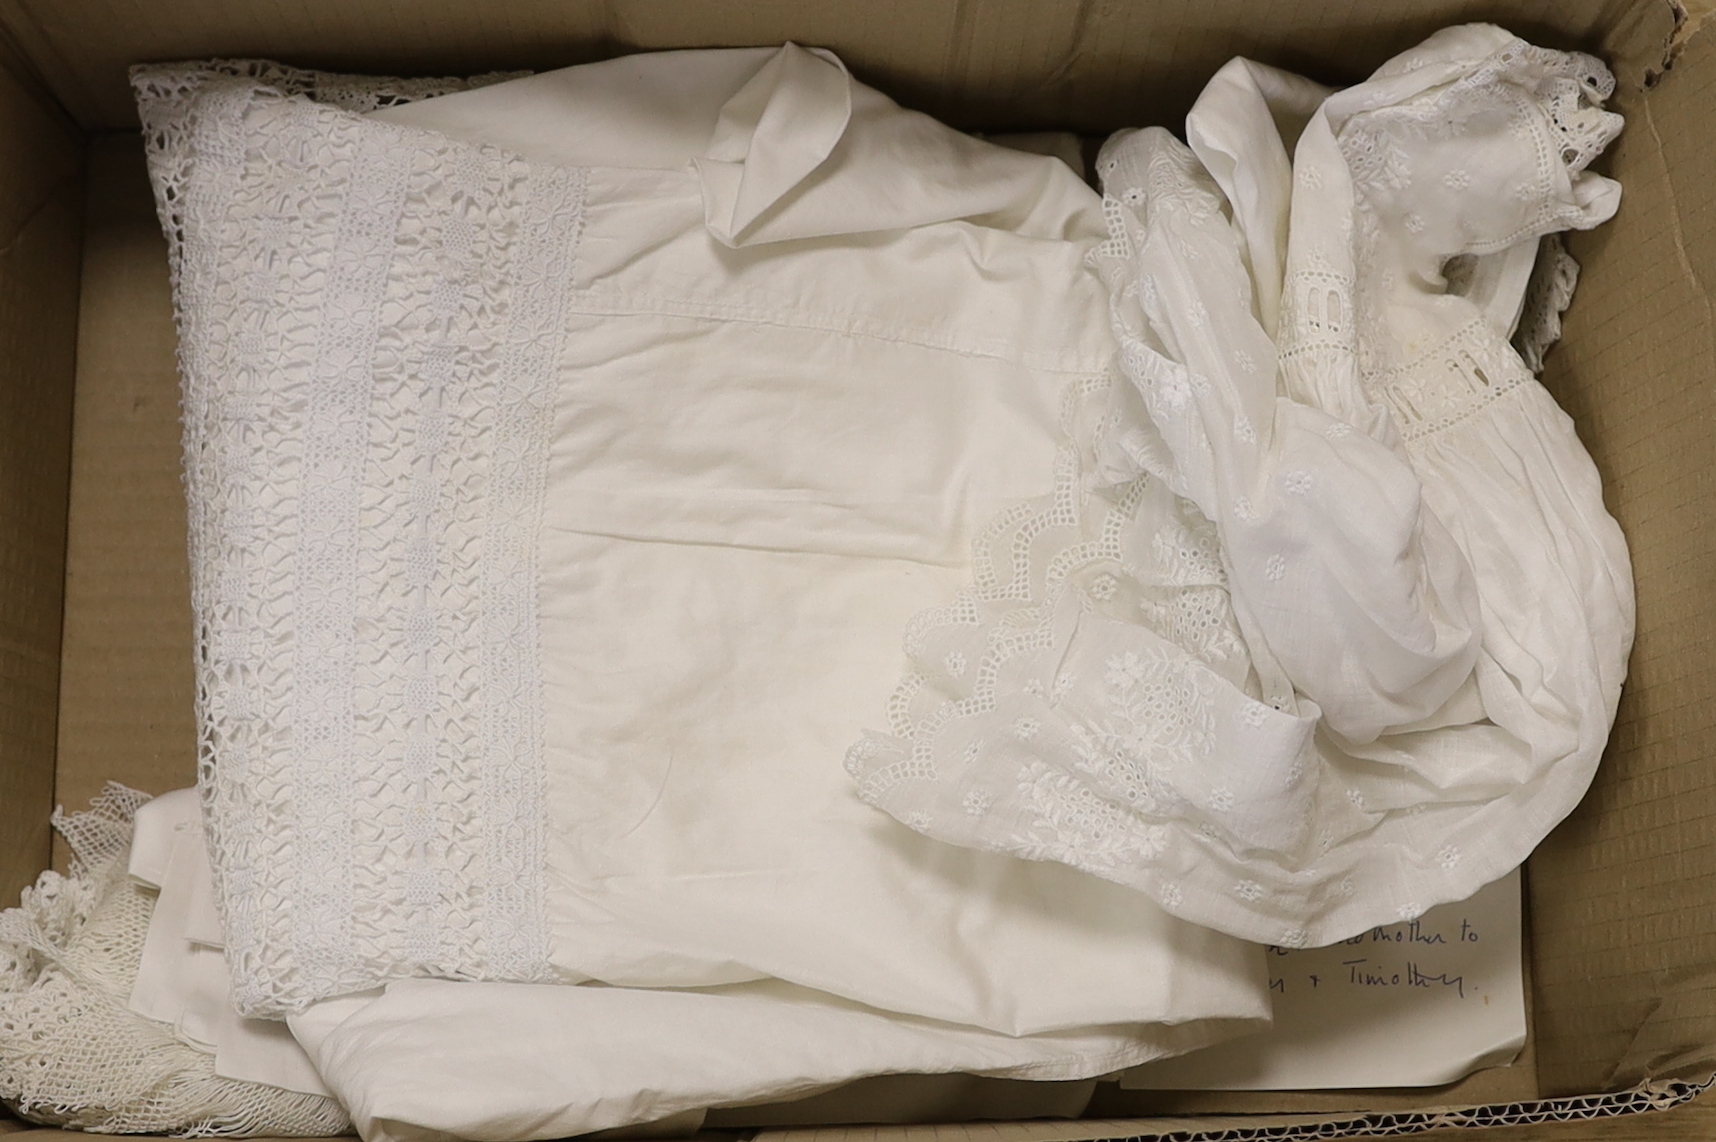 A small collection of early 20th century linen, crochet edge mats, cloths, a petticoat, Bertha, lace stole, etc.